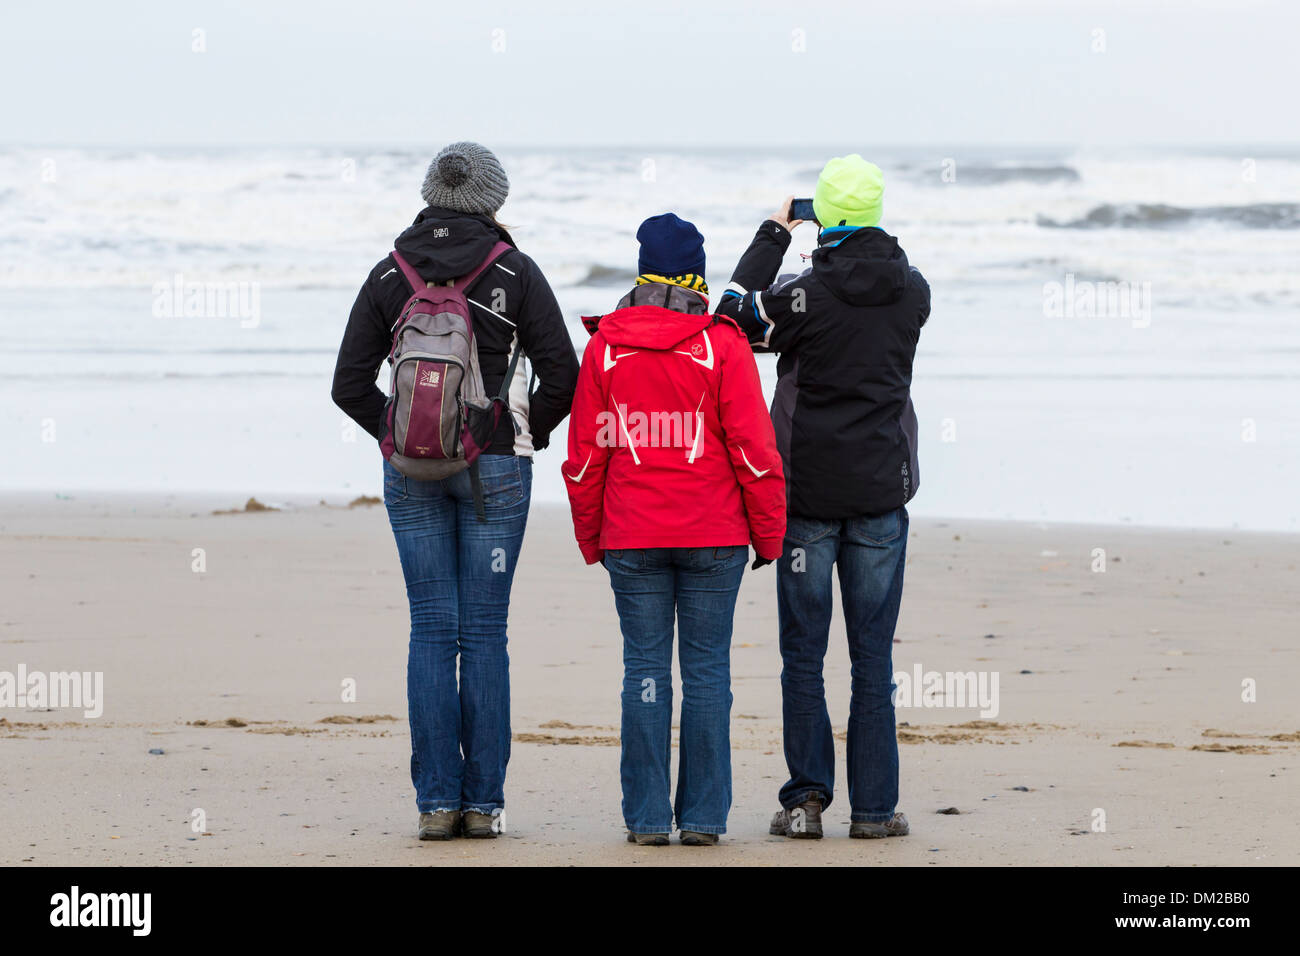 People walking on beach and taking photographs following December 2013 tidal surge storms in UK. Stock Photo